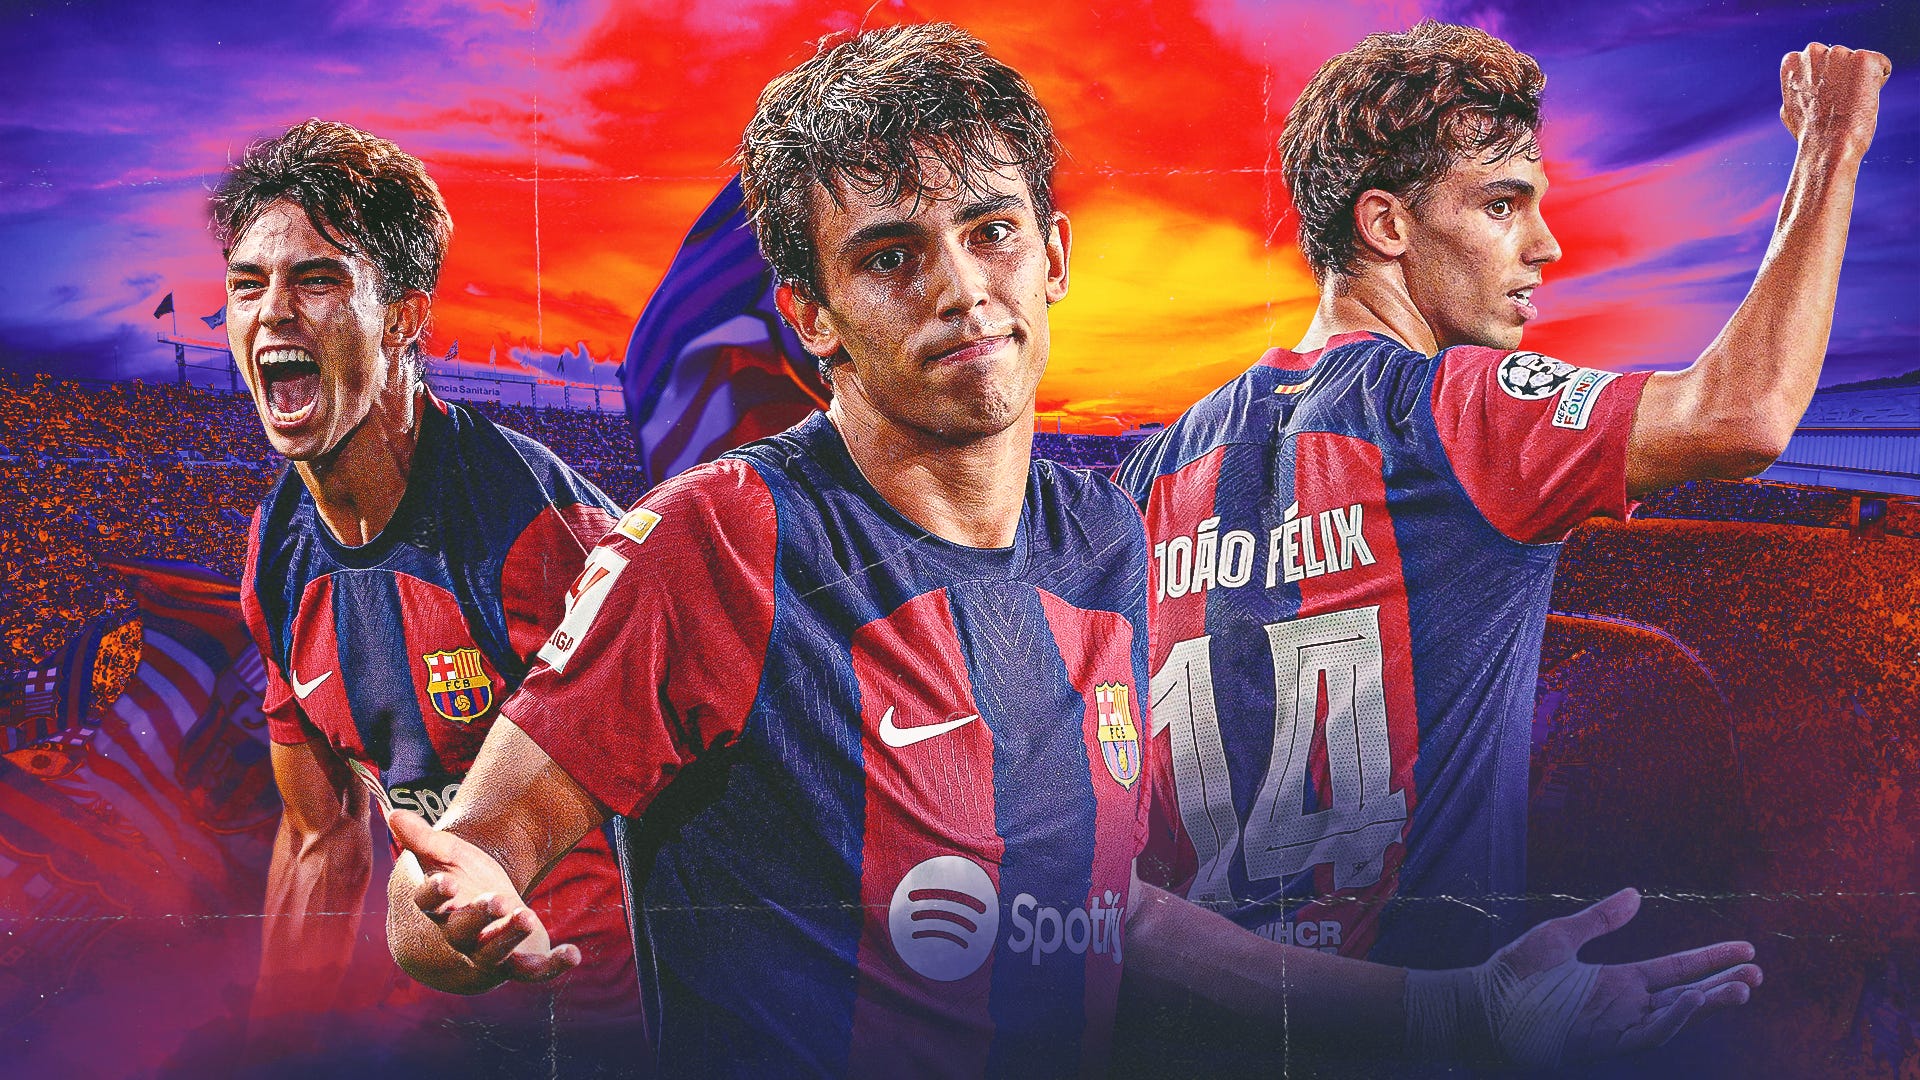 Joao Felix’s dream come true!  FC Barcelona is the ideal place to rebuild the Portuguese playmaker’s career.